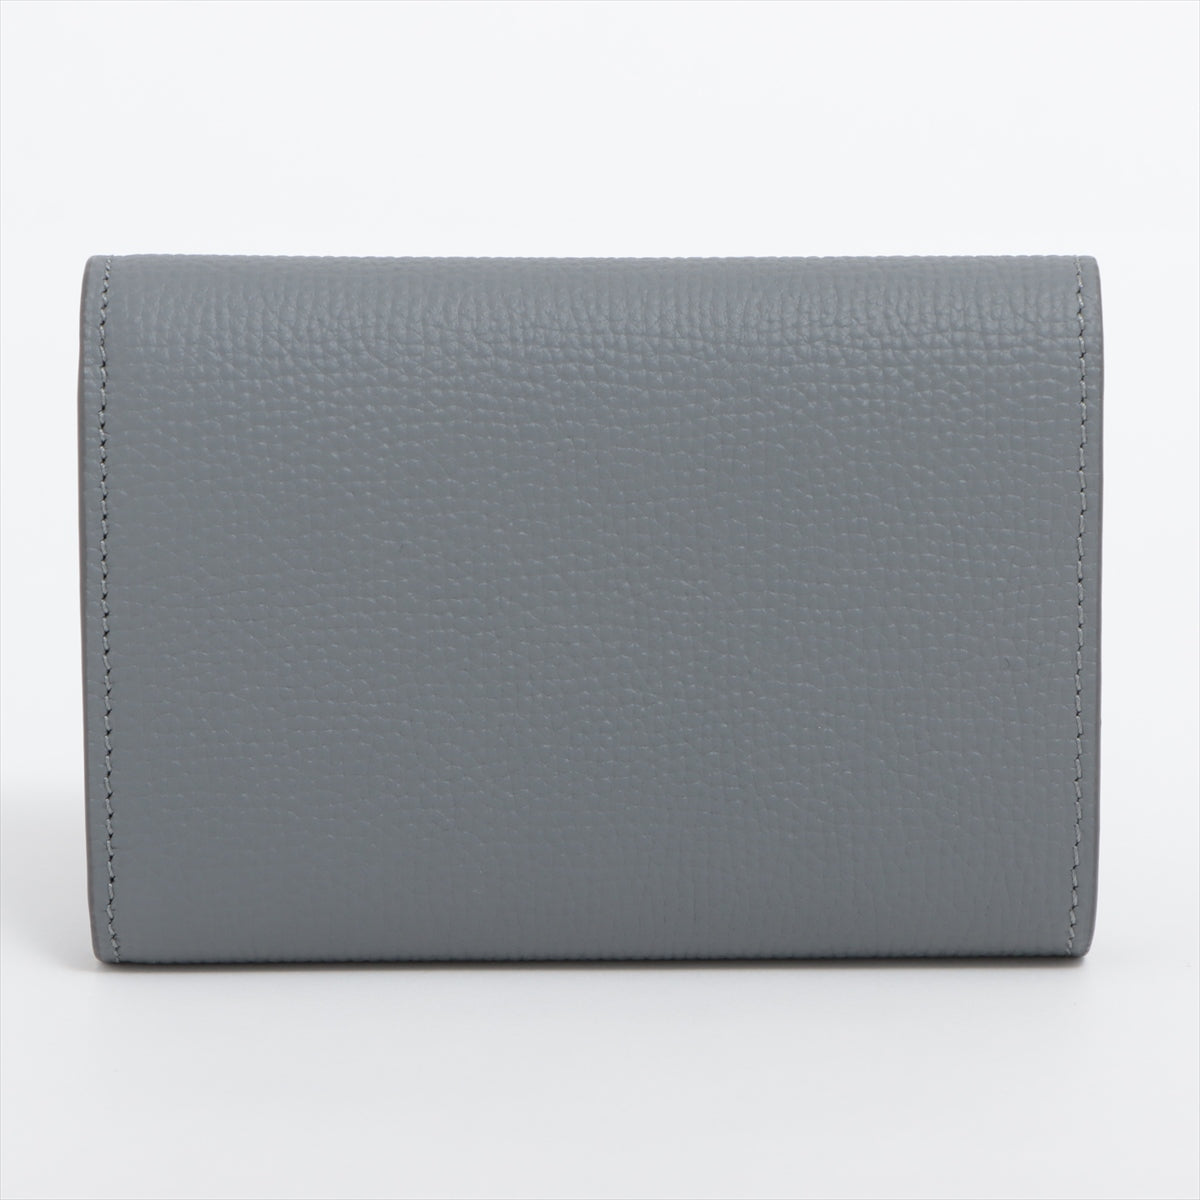 Loewe Anagram Small Vertical Wallet Leather Compact Wallet Grey